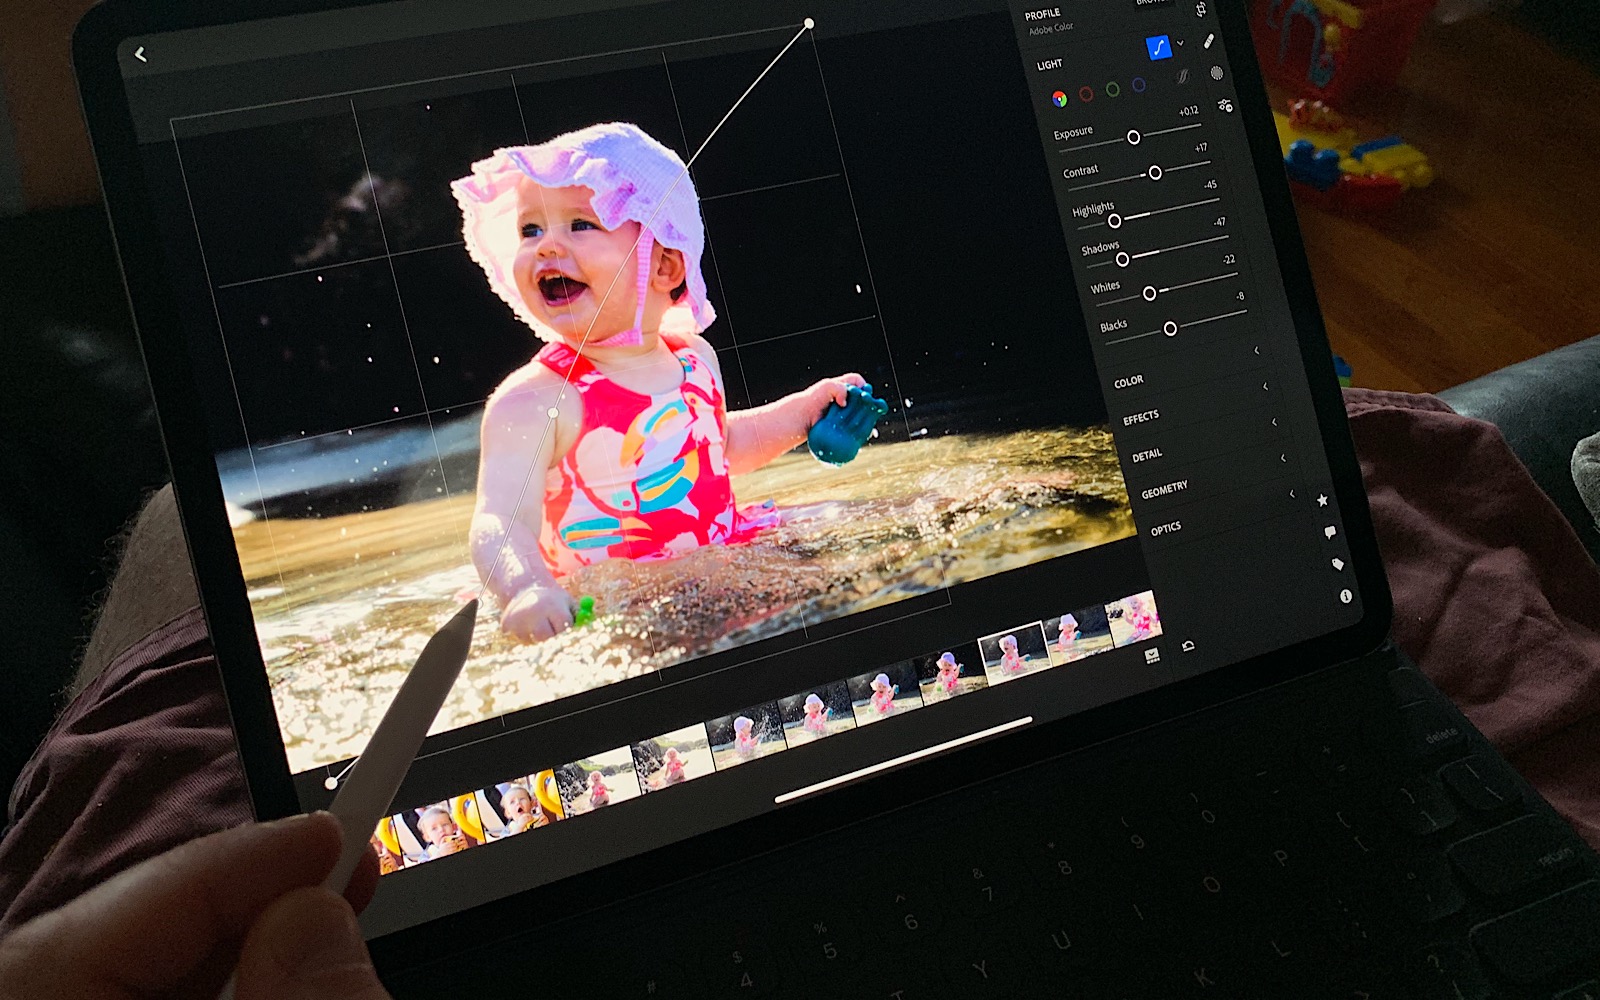 Using the Apple Pencil, you can edit photos on the 2018 iPad Pro with more precision